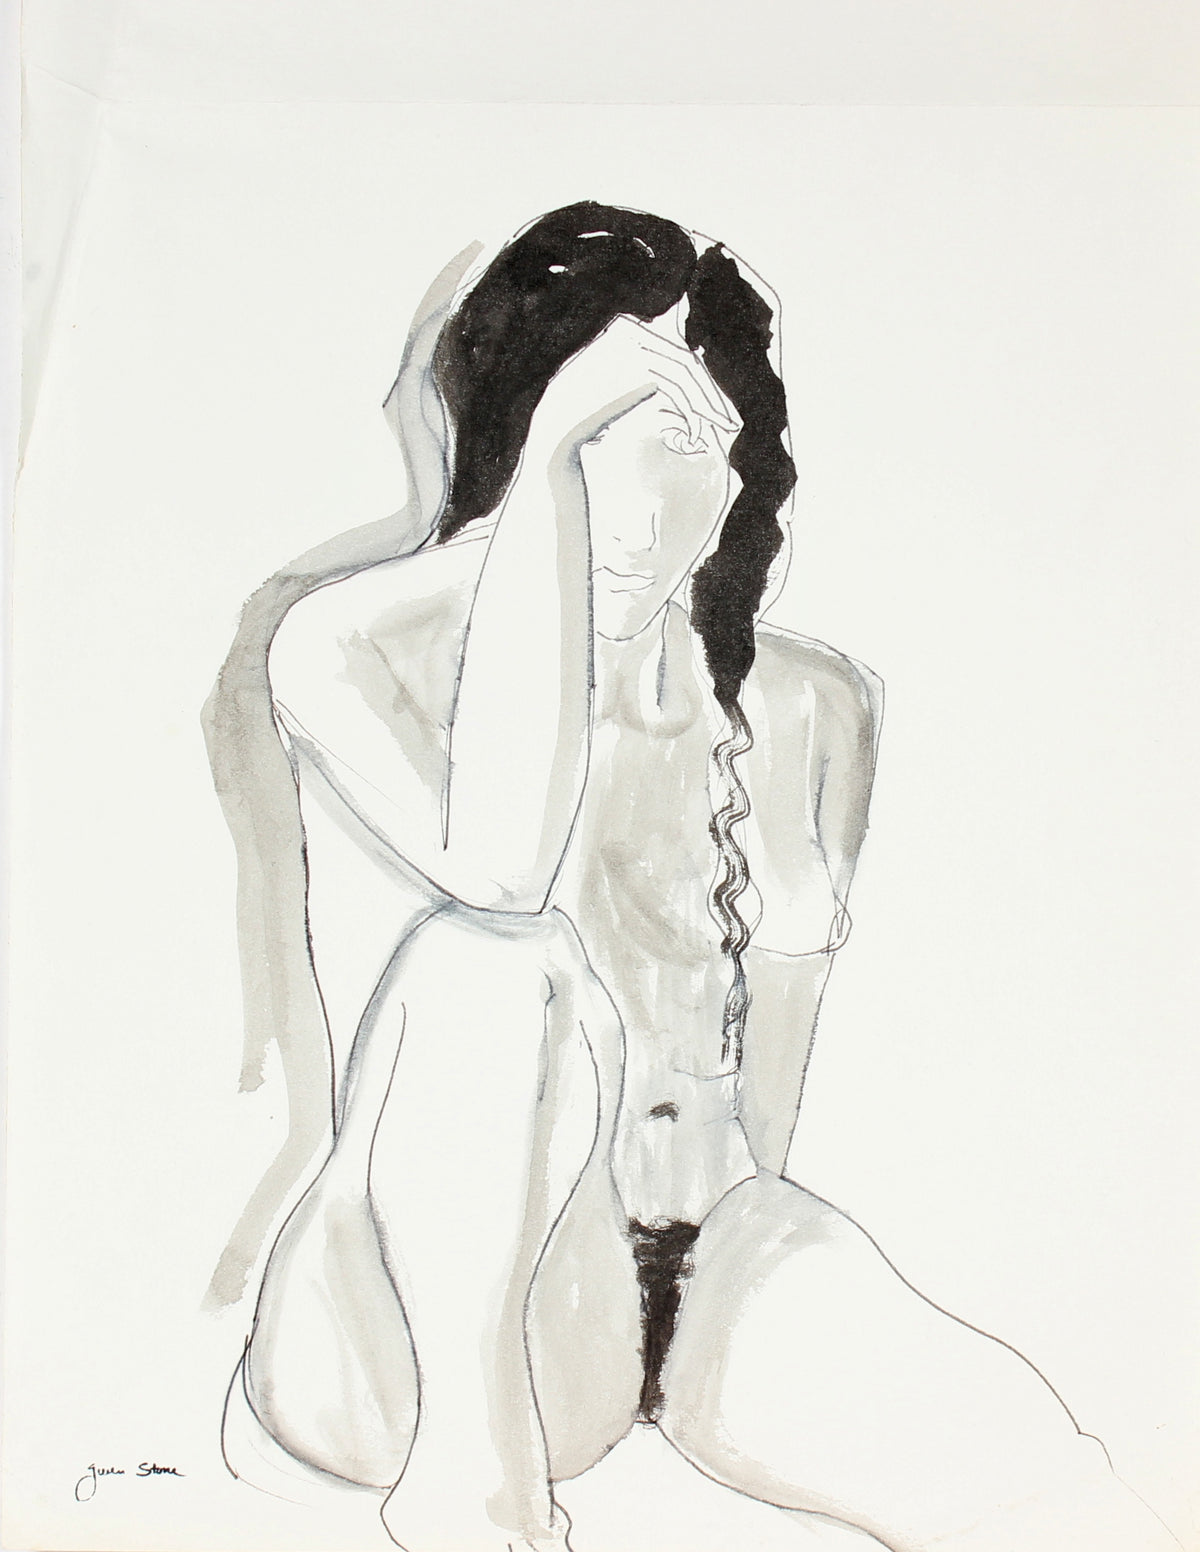 Seated Female Nude &lt;br&gt;Late 20th Century Ink&lt;br&gt;&lt;br&gt;#84639